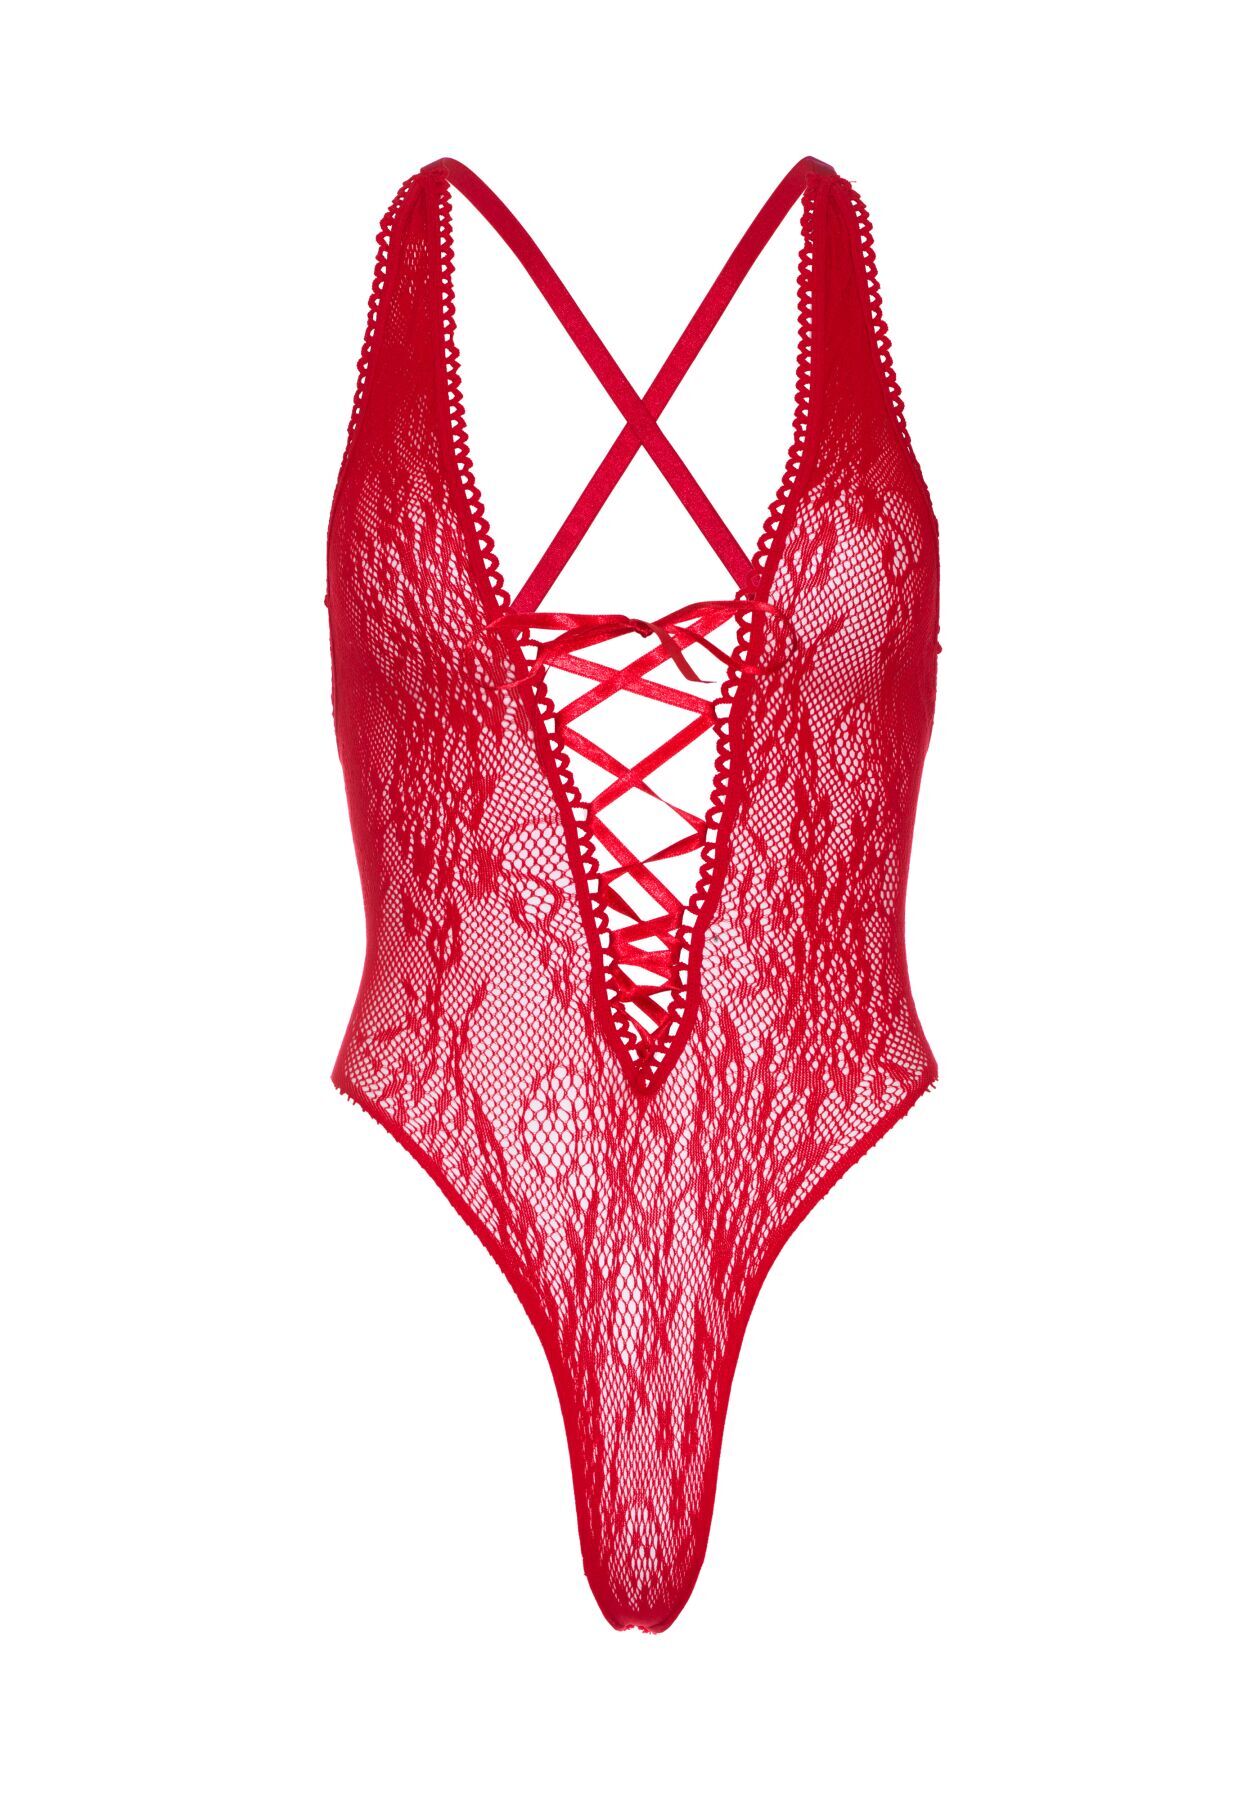   Leg Avenue Floral lace thong teddy Red,   , one size